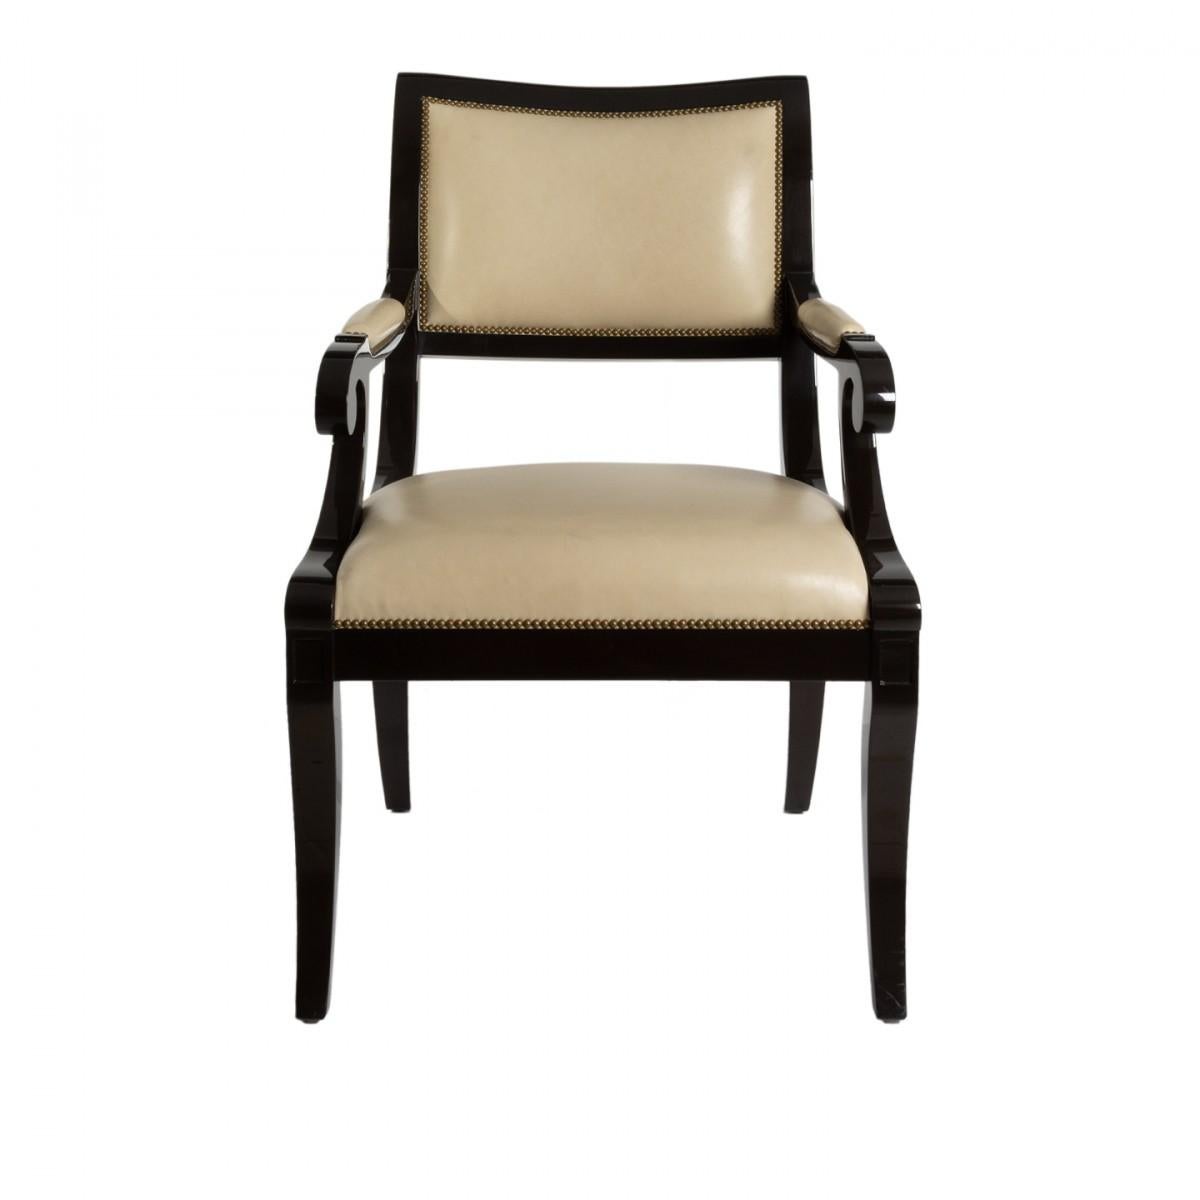 A Nancy Corzine desk chair or armchair with an ebonized frame and nailhead trim, upholstered in cream leather.